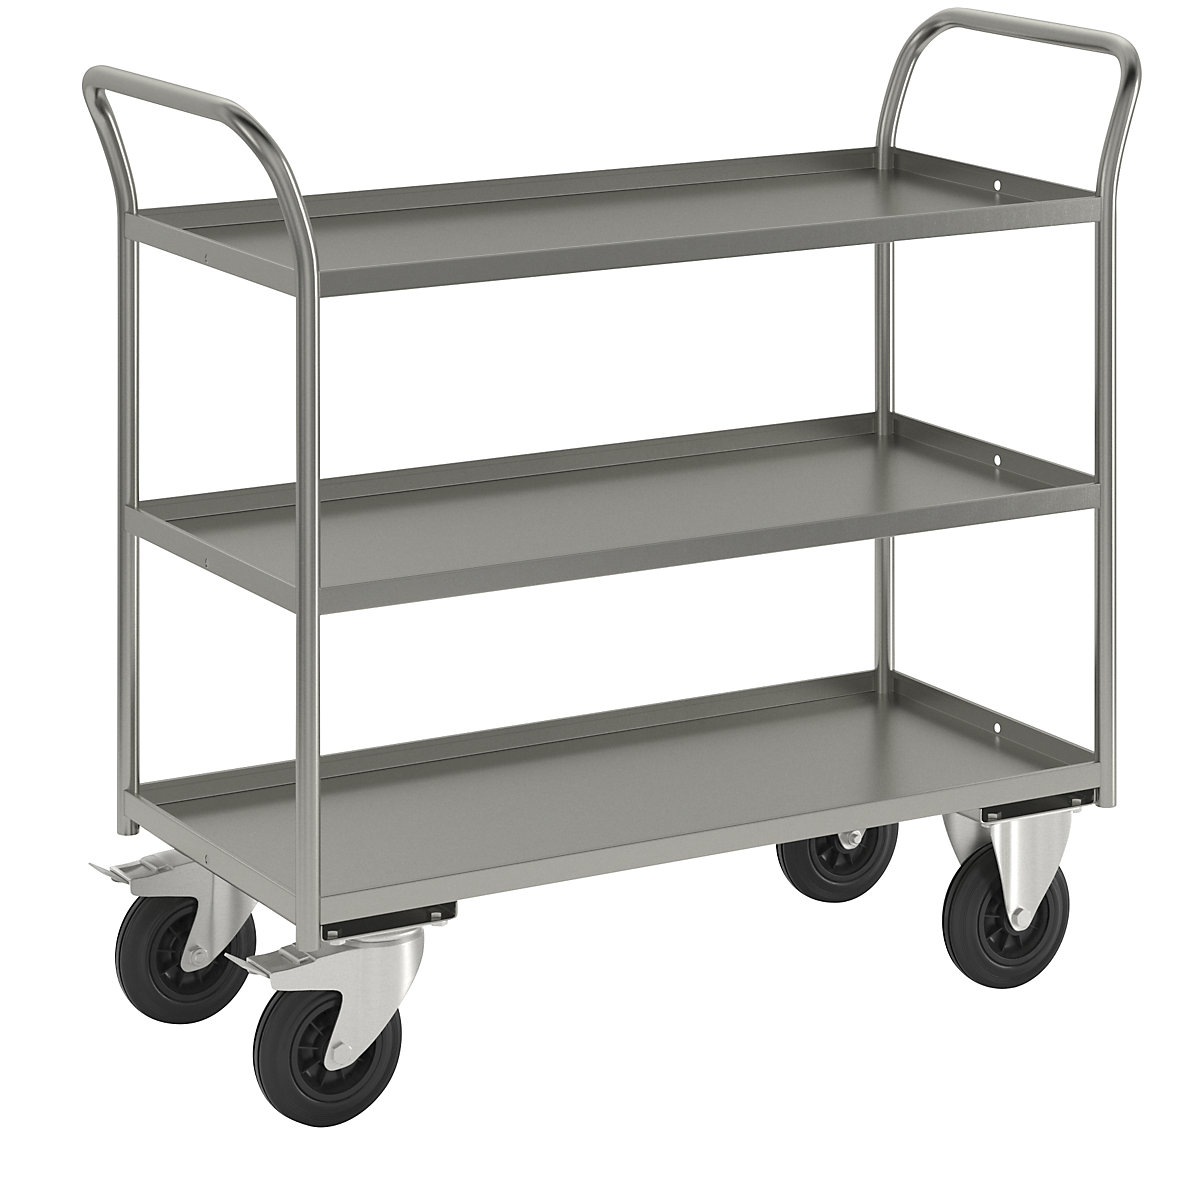 KM41 table trolley – Kongamek, 3 shelves with raised edges, LxWxH 1080 x 450 x 1000 mm, zinc plated, 2 swivel castors with stops, 2 fixed castors-1